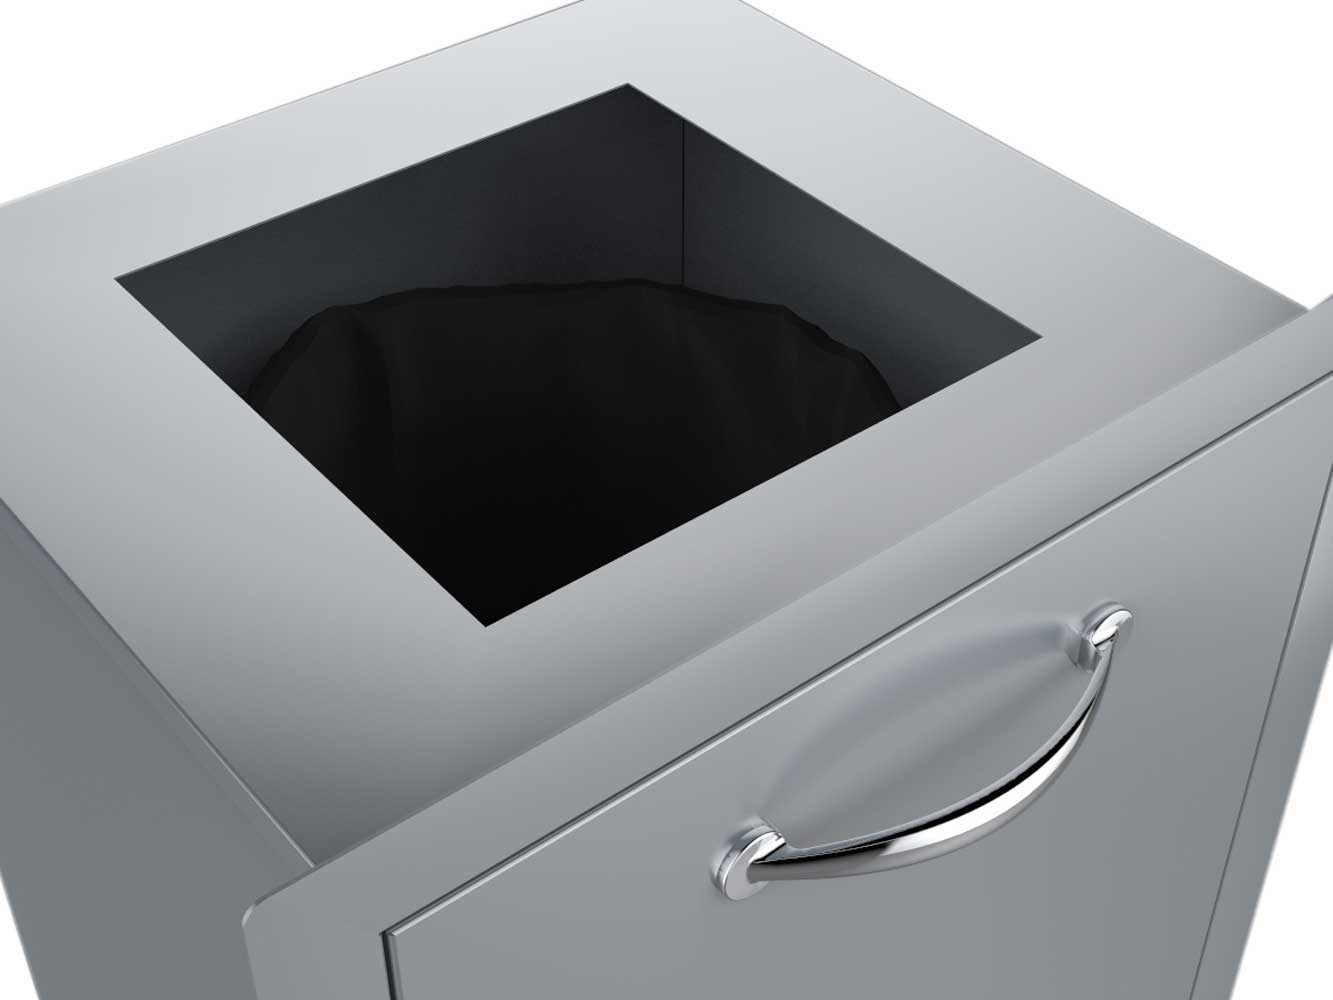 Sunstone 20" Enclosed Trash Drawer w/Trash Bag Ring & Top Punch- Out for counter trash chute - A-TRHD